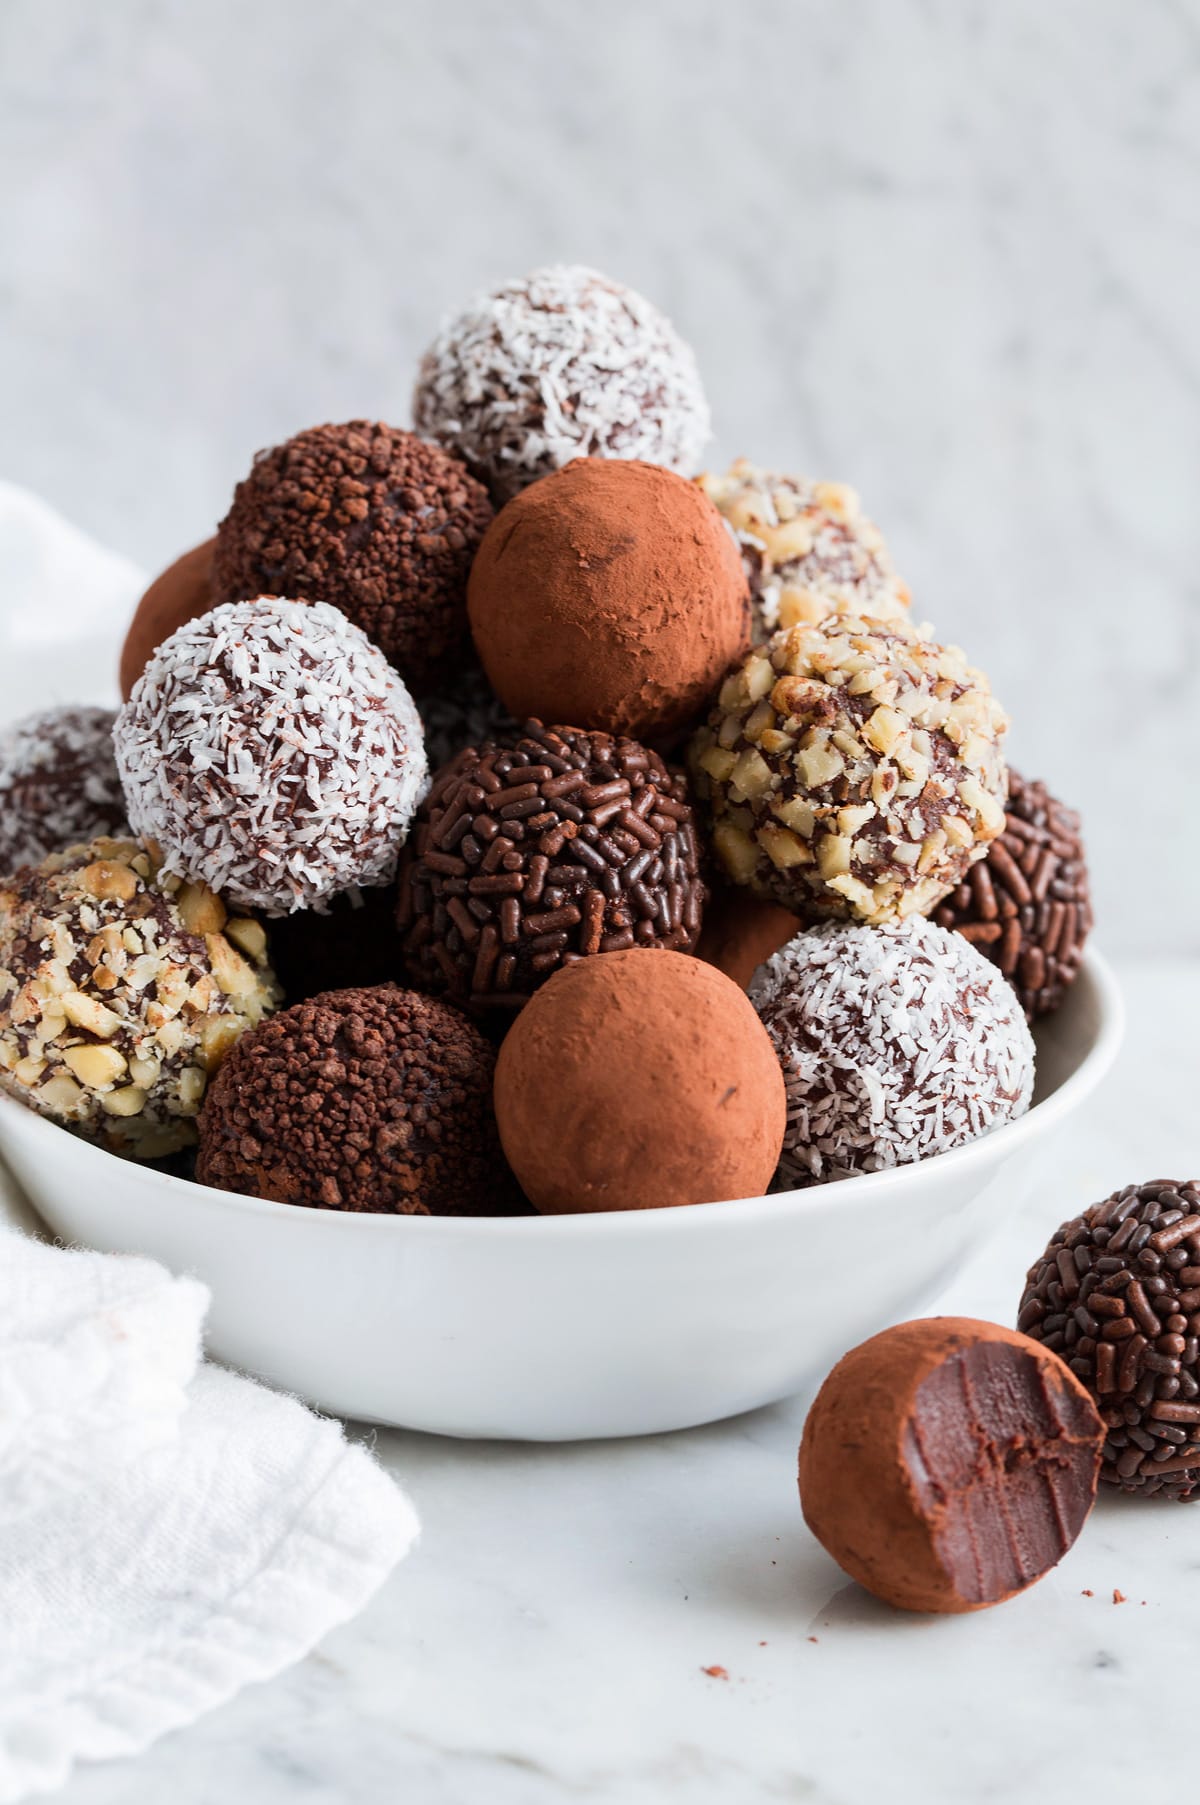 Stack of homemade chocolate truffles covered in cocoa, nuts, sprinkles and coconut piled into a pyramidal shape in a white bowl set over a marble surface.